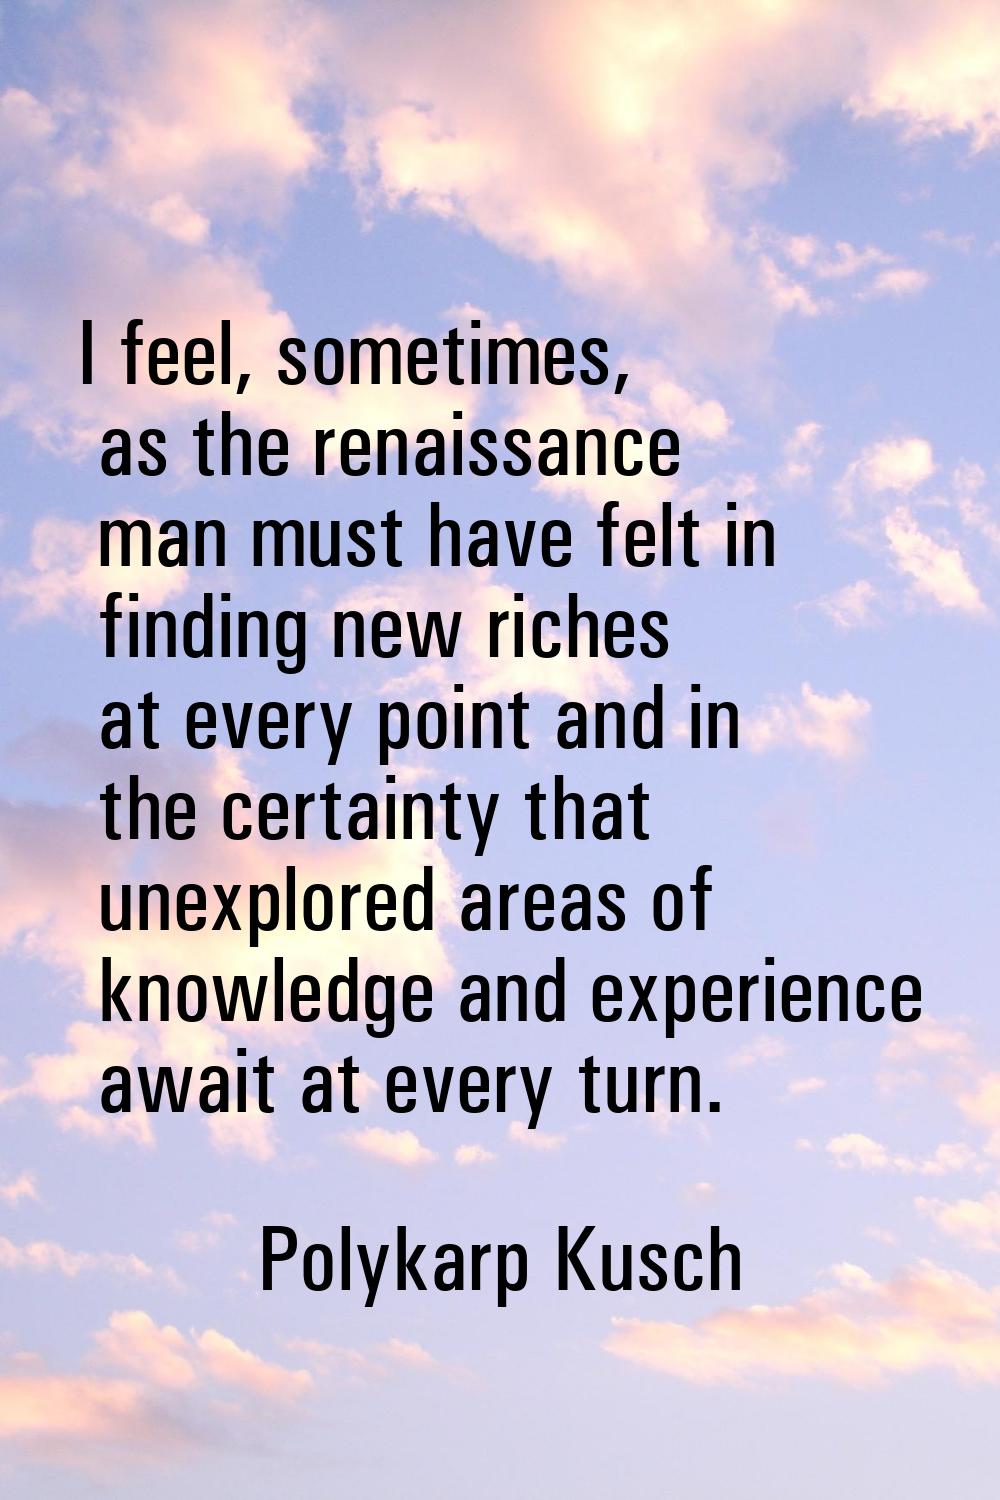 I feel, sometimes, as the renaissance man must have felt in finding new riches at every point and i